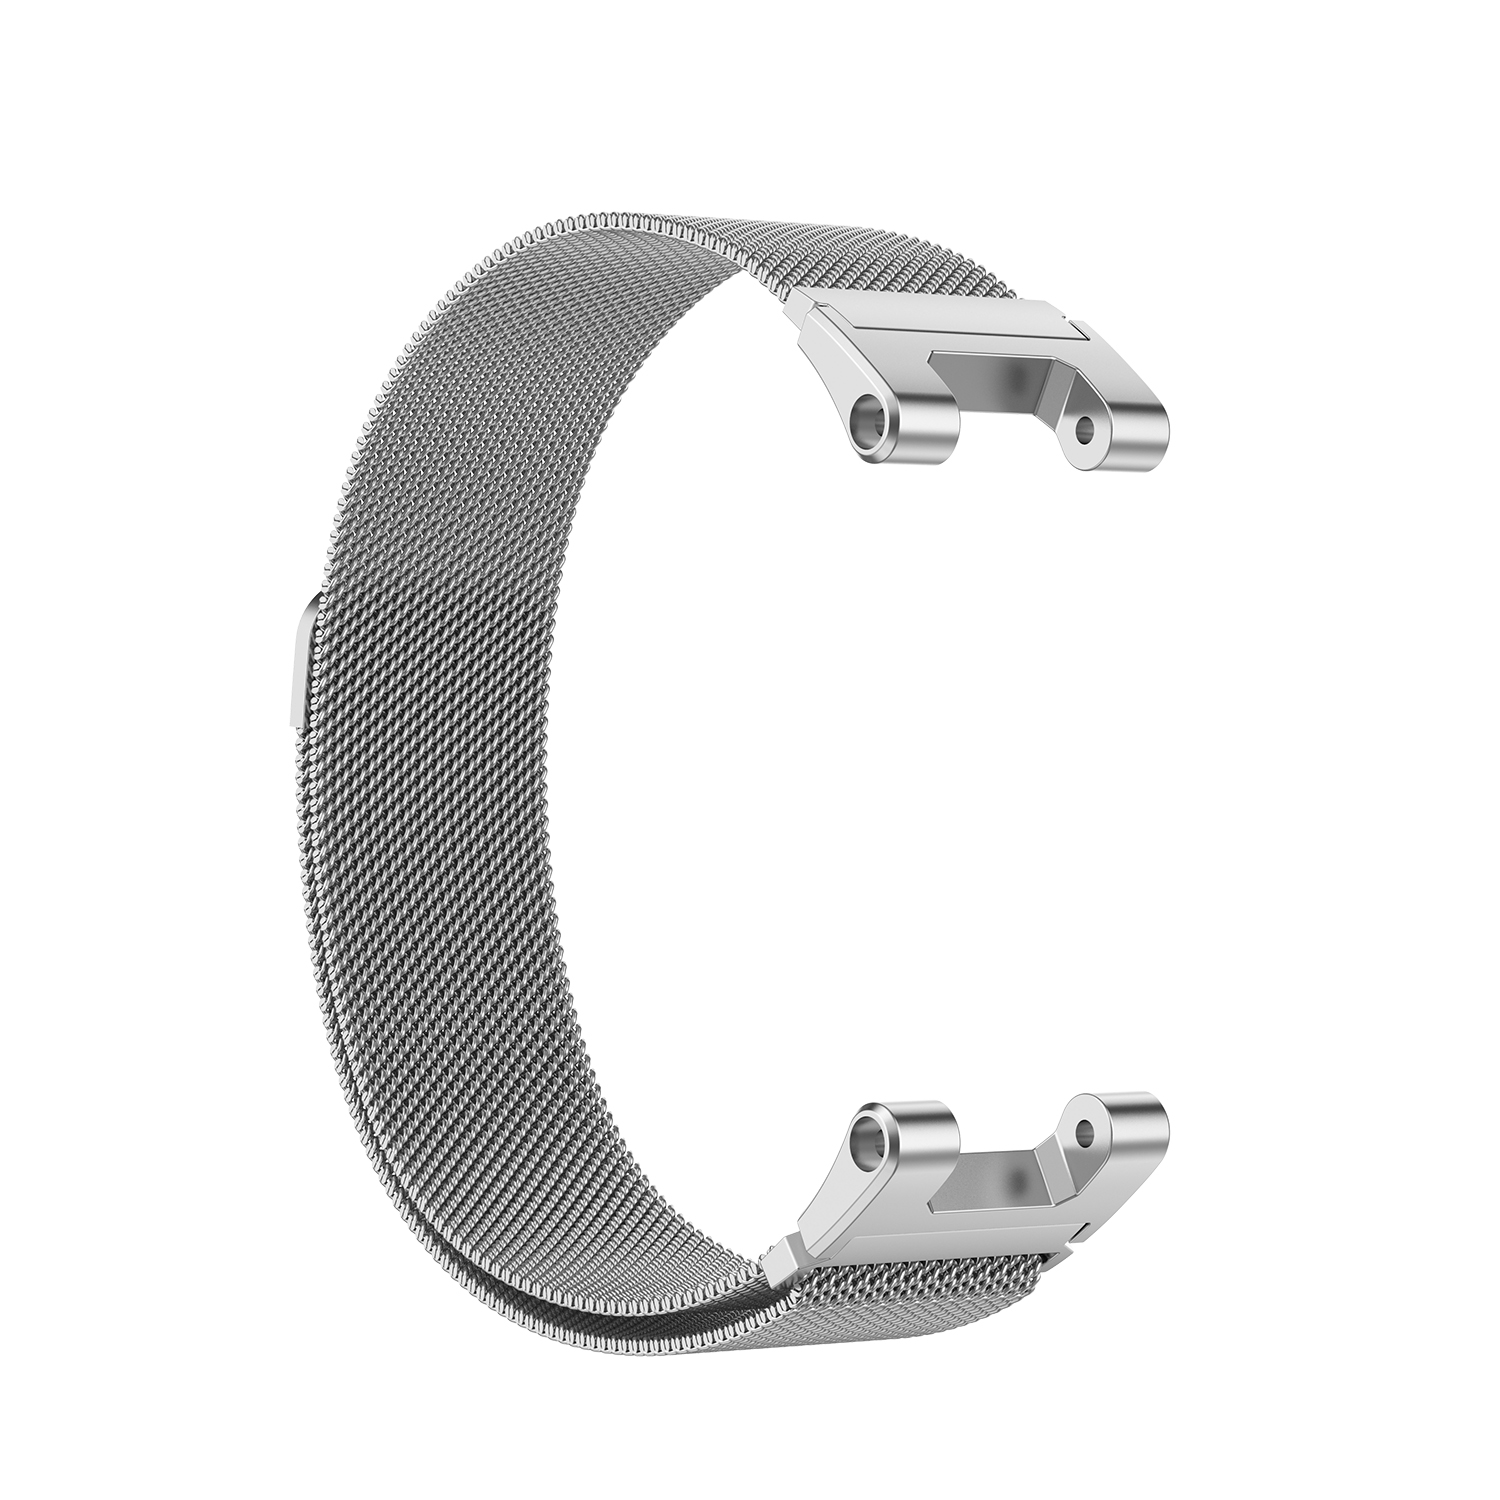 Bakeey-Milanese-Stainless-Steel-Strap-Watch-Band-Watch-Strap-Replacement-for-Amazfit-Ares-1748296-7